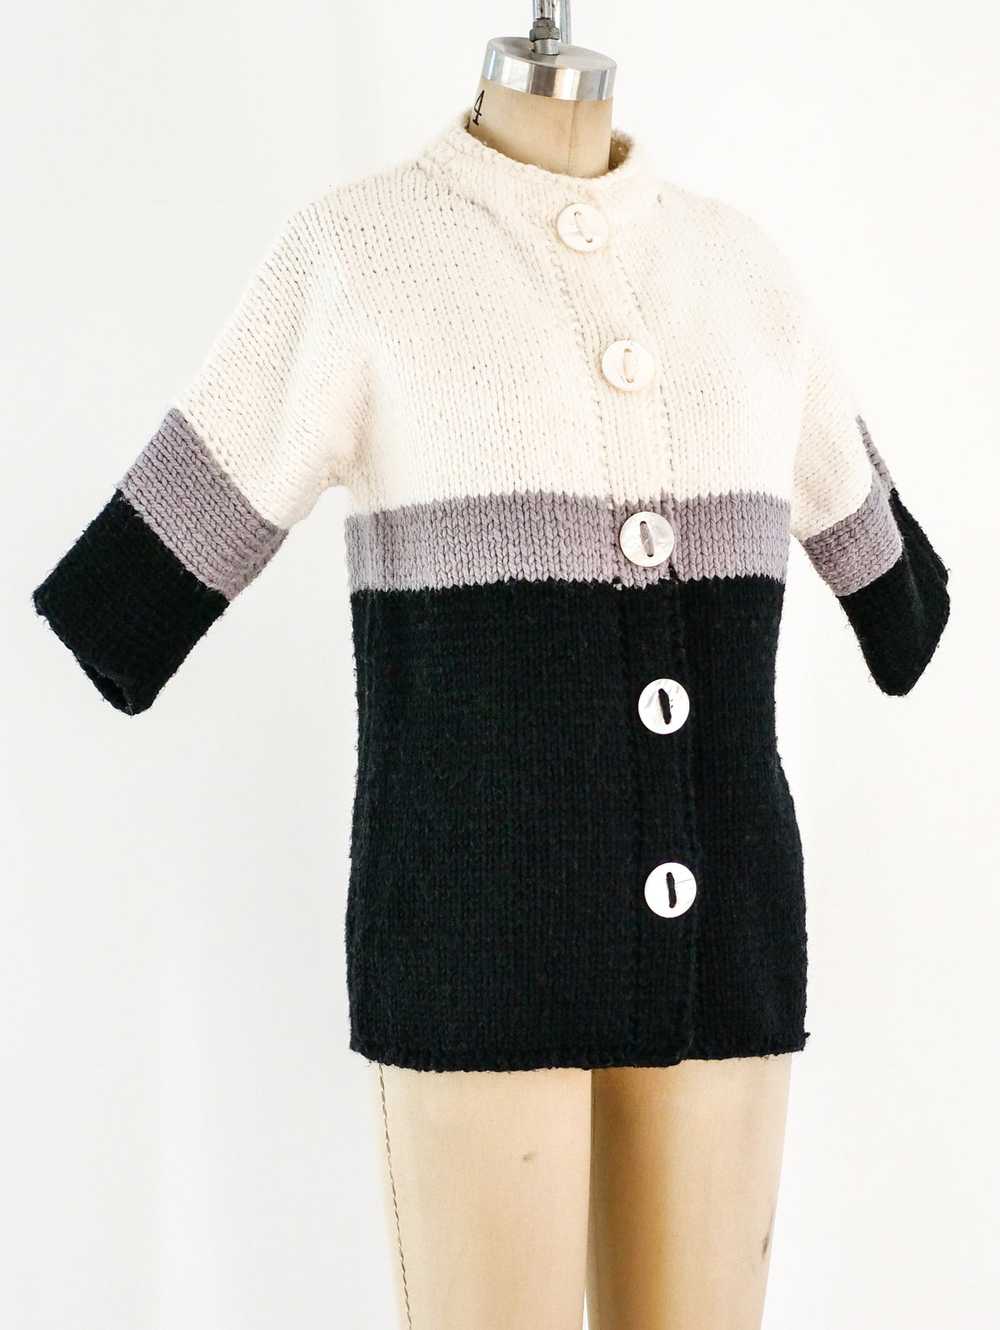 1960s Colorblock Knit Sweater - image 3